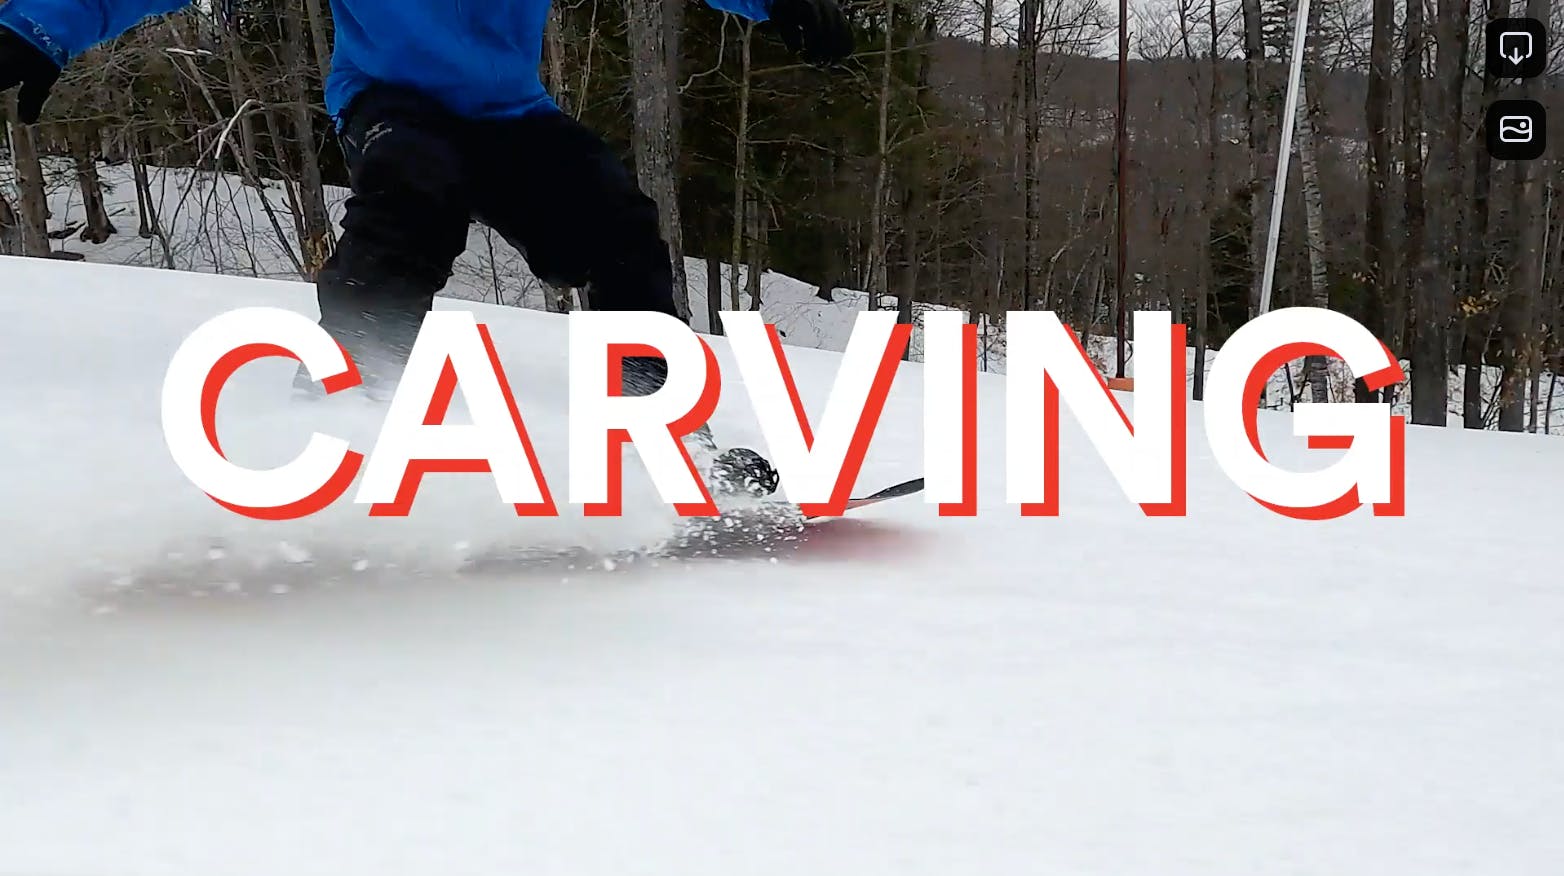 A snowboarder carving through the snow with a "Carving" graphic over the image